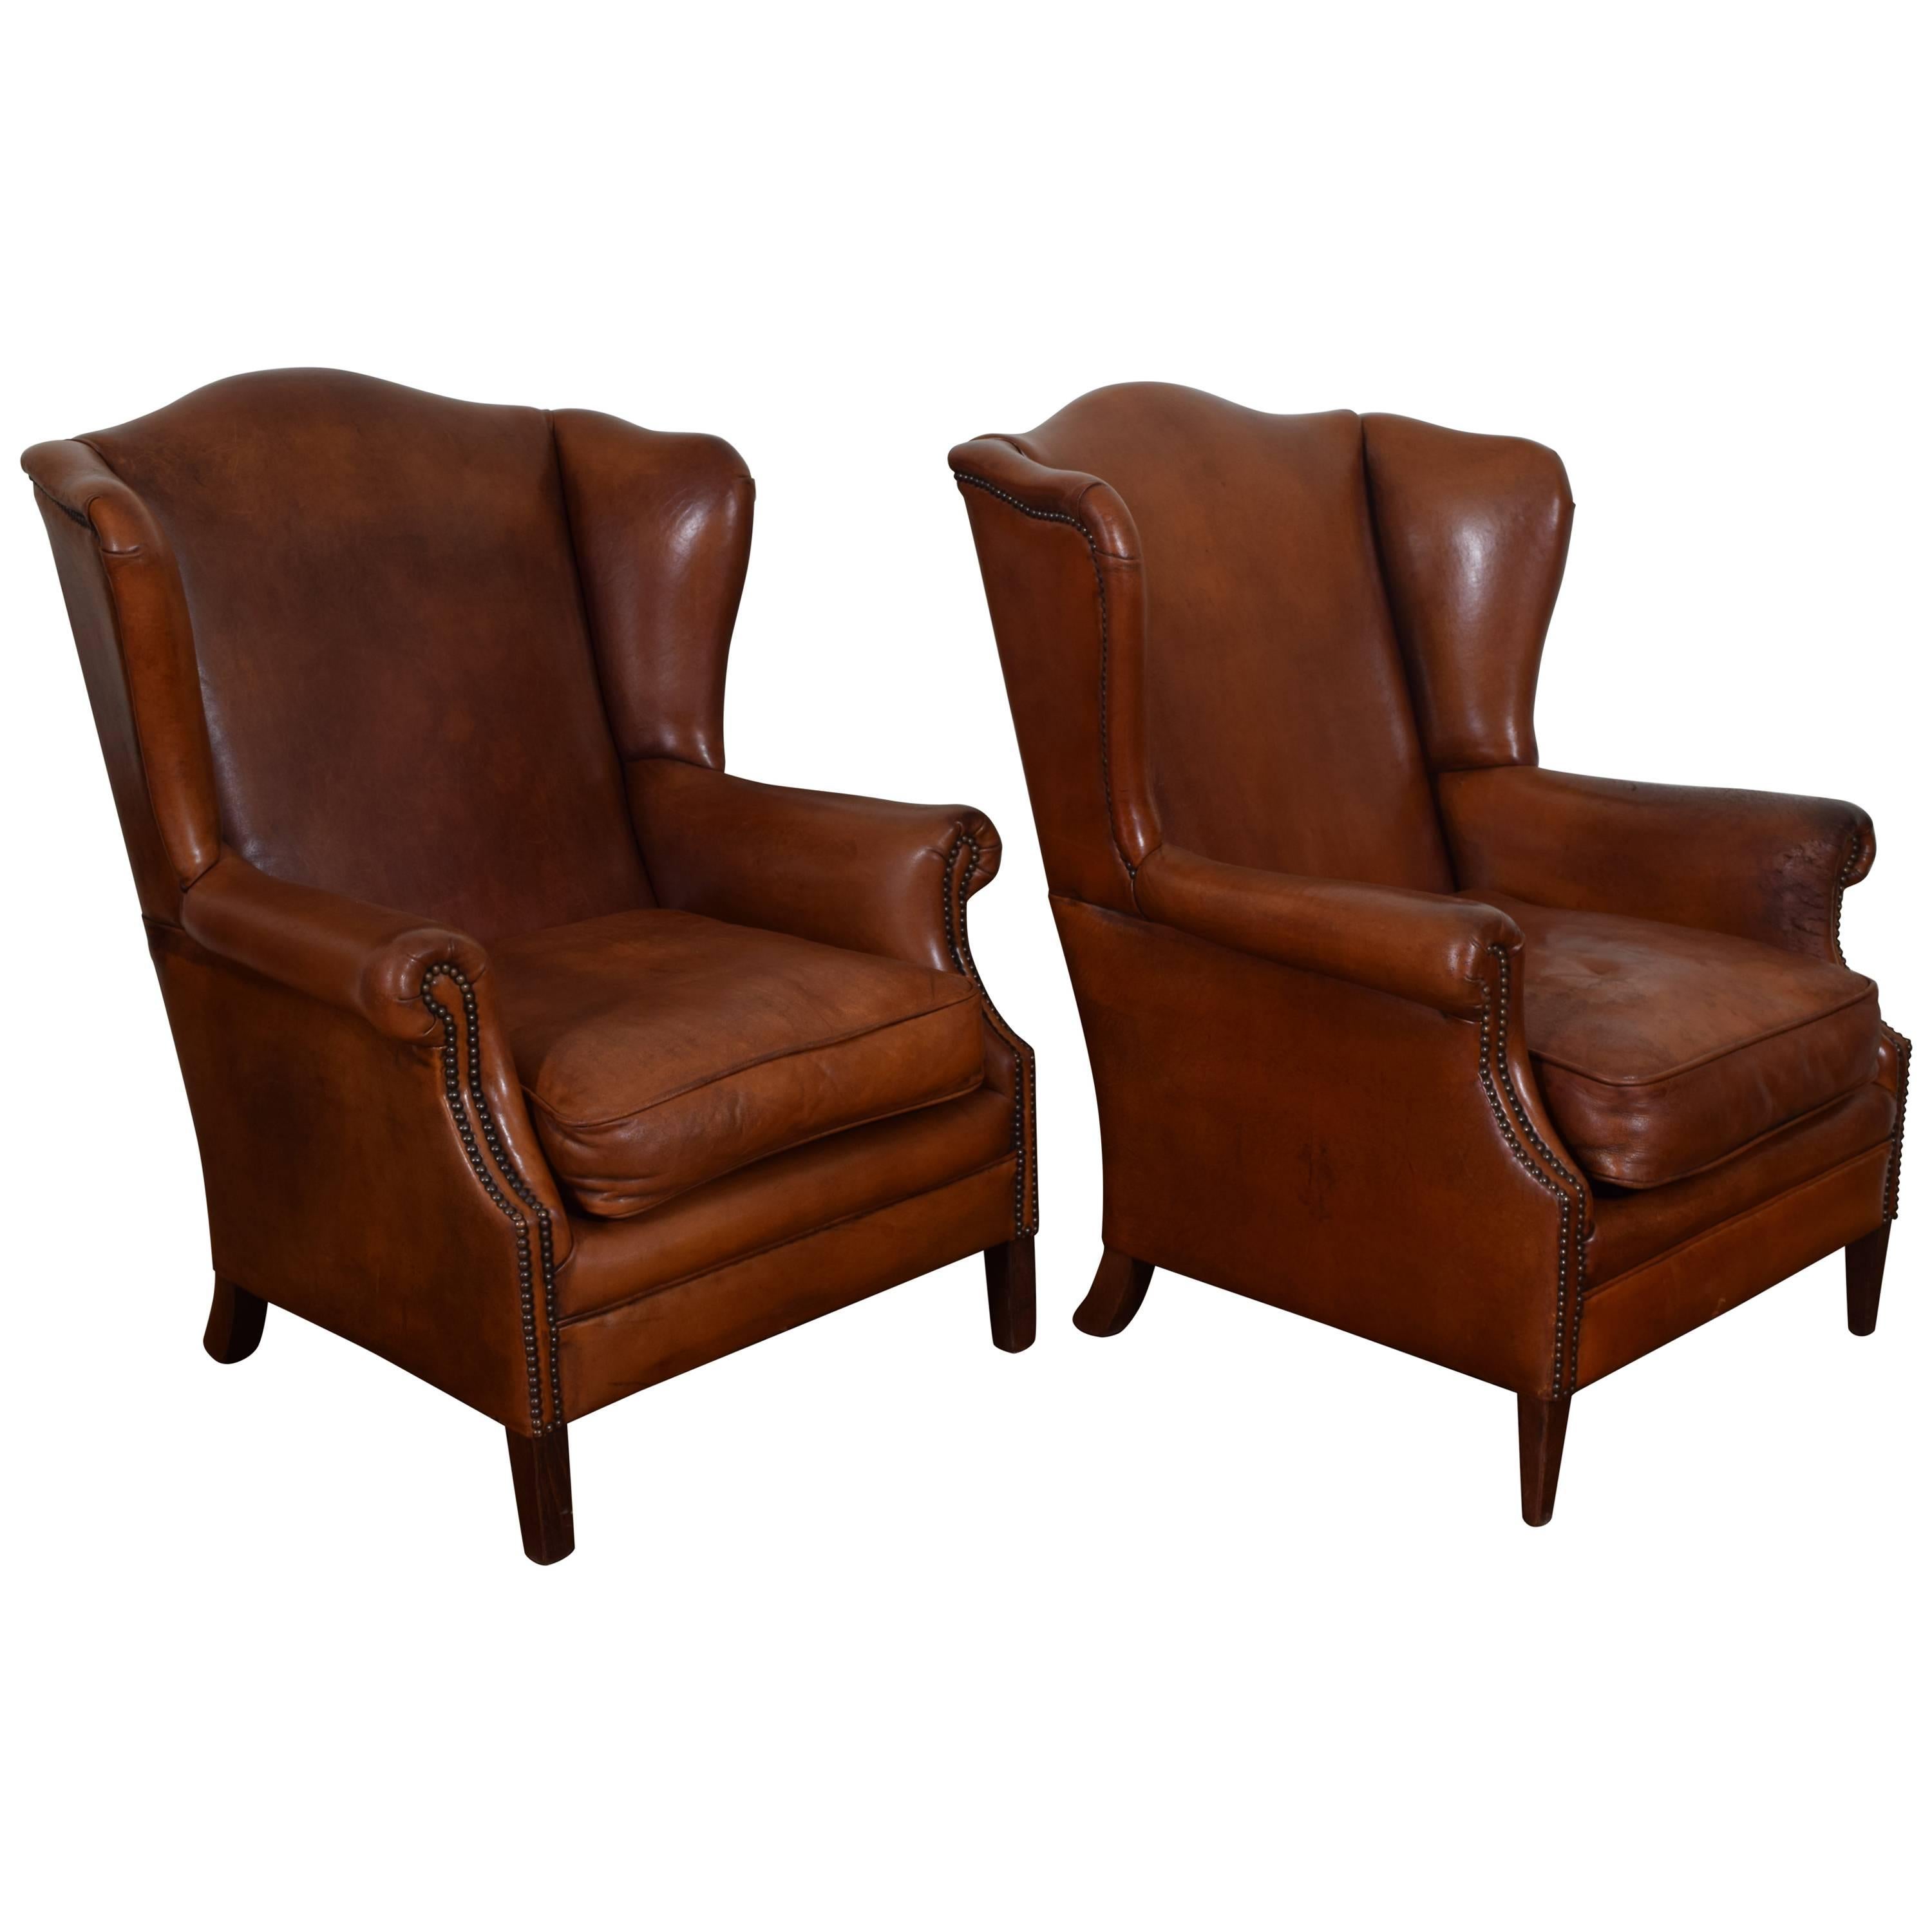 French Pair of Chestnut Leather Wing Chairs, Second Quarter of the 20th Century